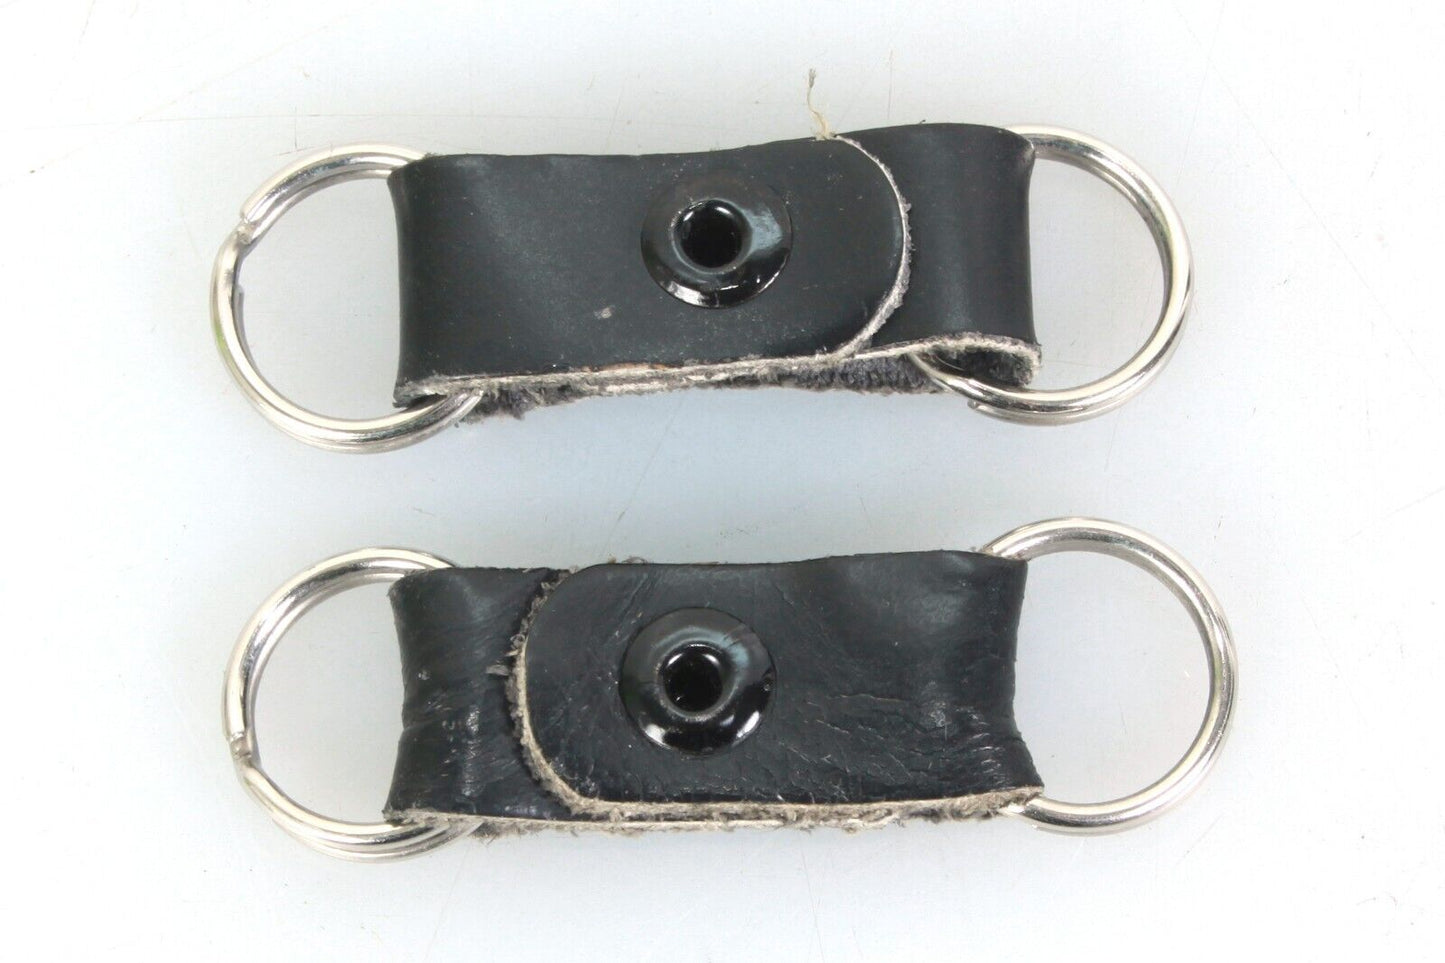 CAMERA STRAP PROTECTORS LEATHER SET OF 2